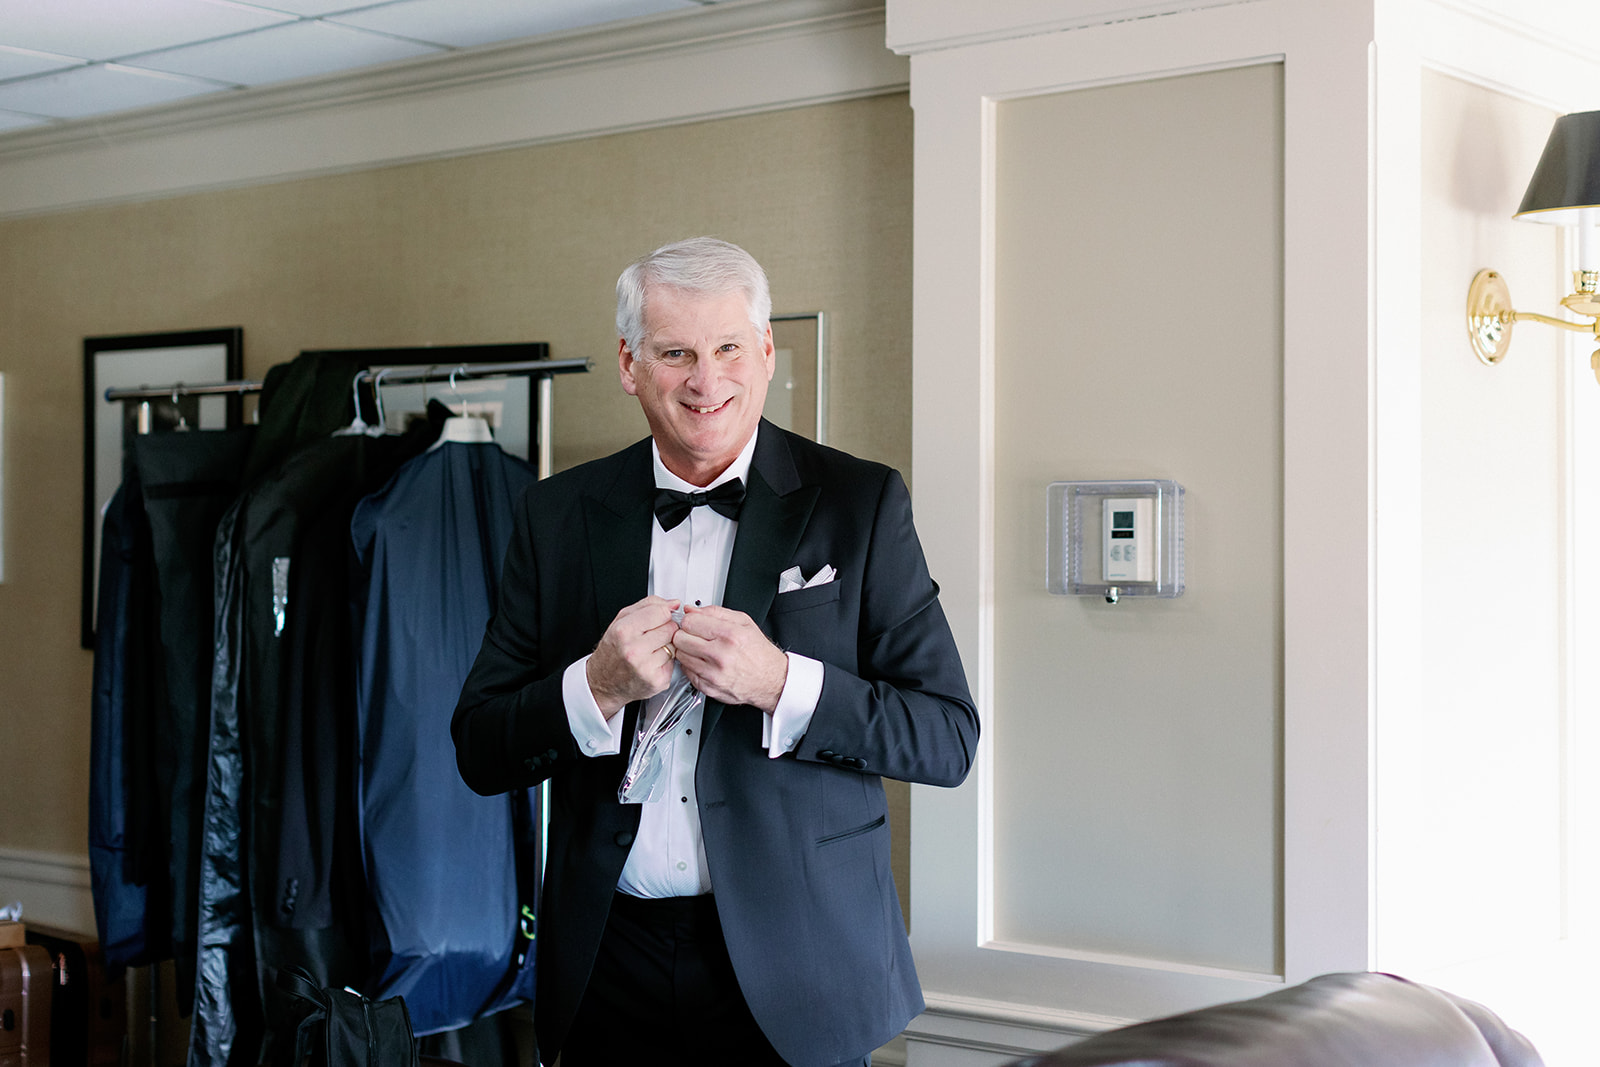 Posed moment of the groom's father in the men's locker room at Pine Hollow Country Club.